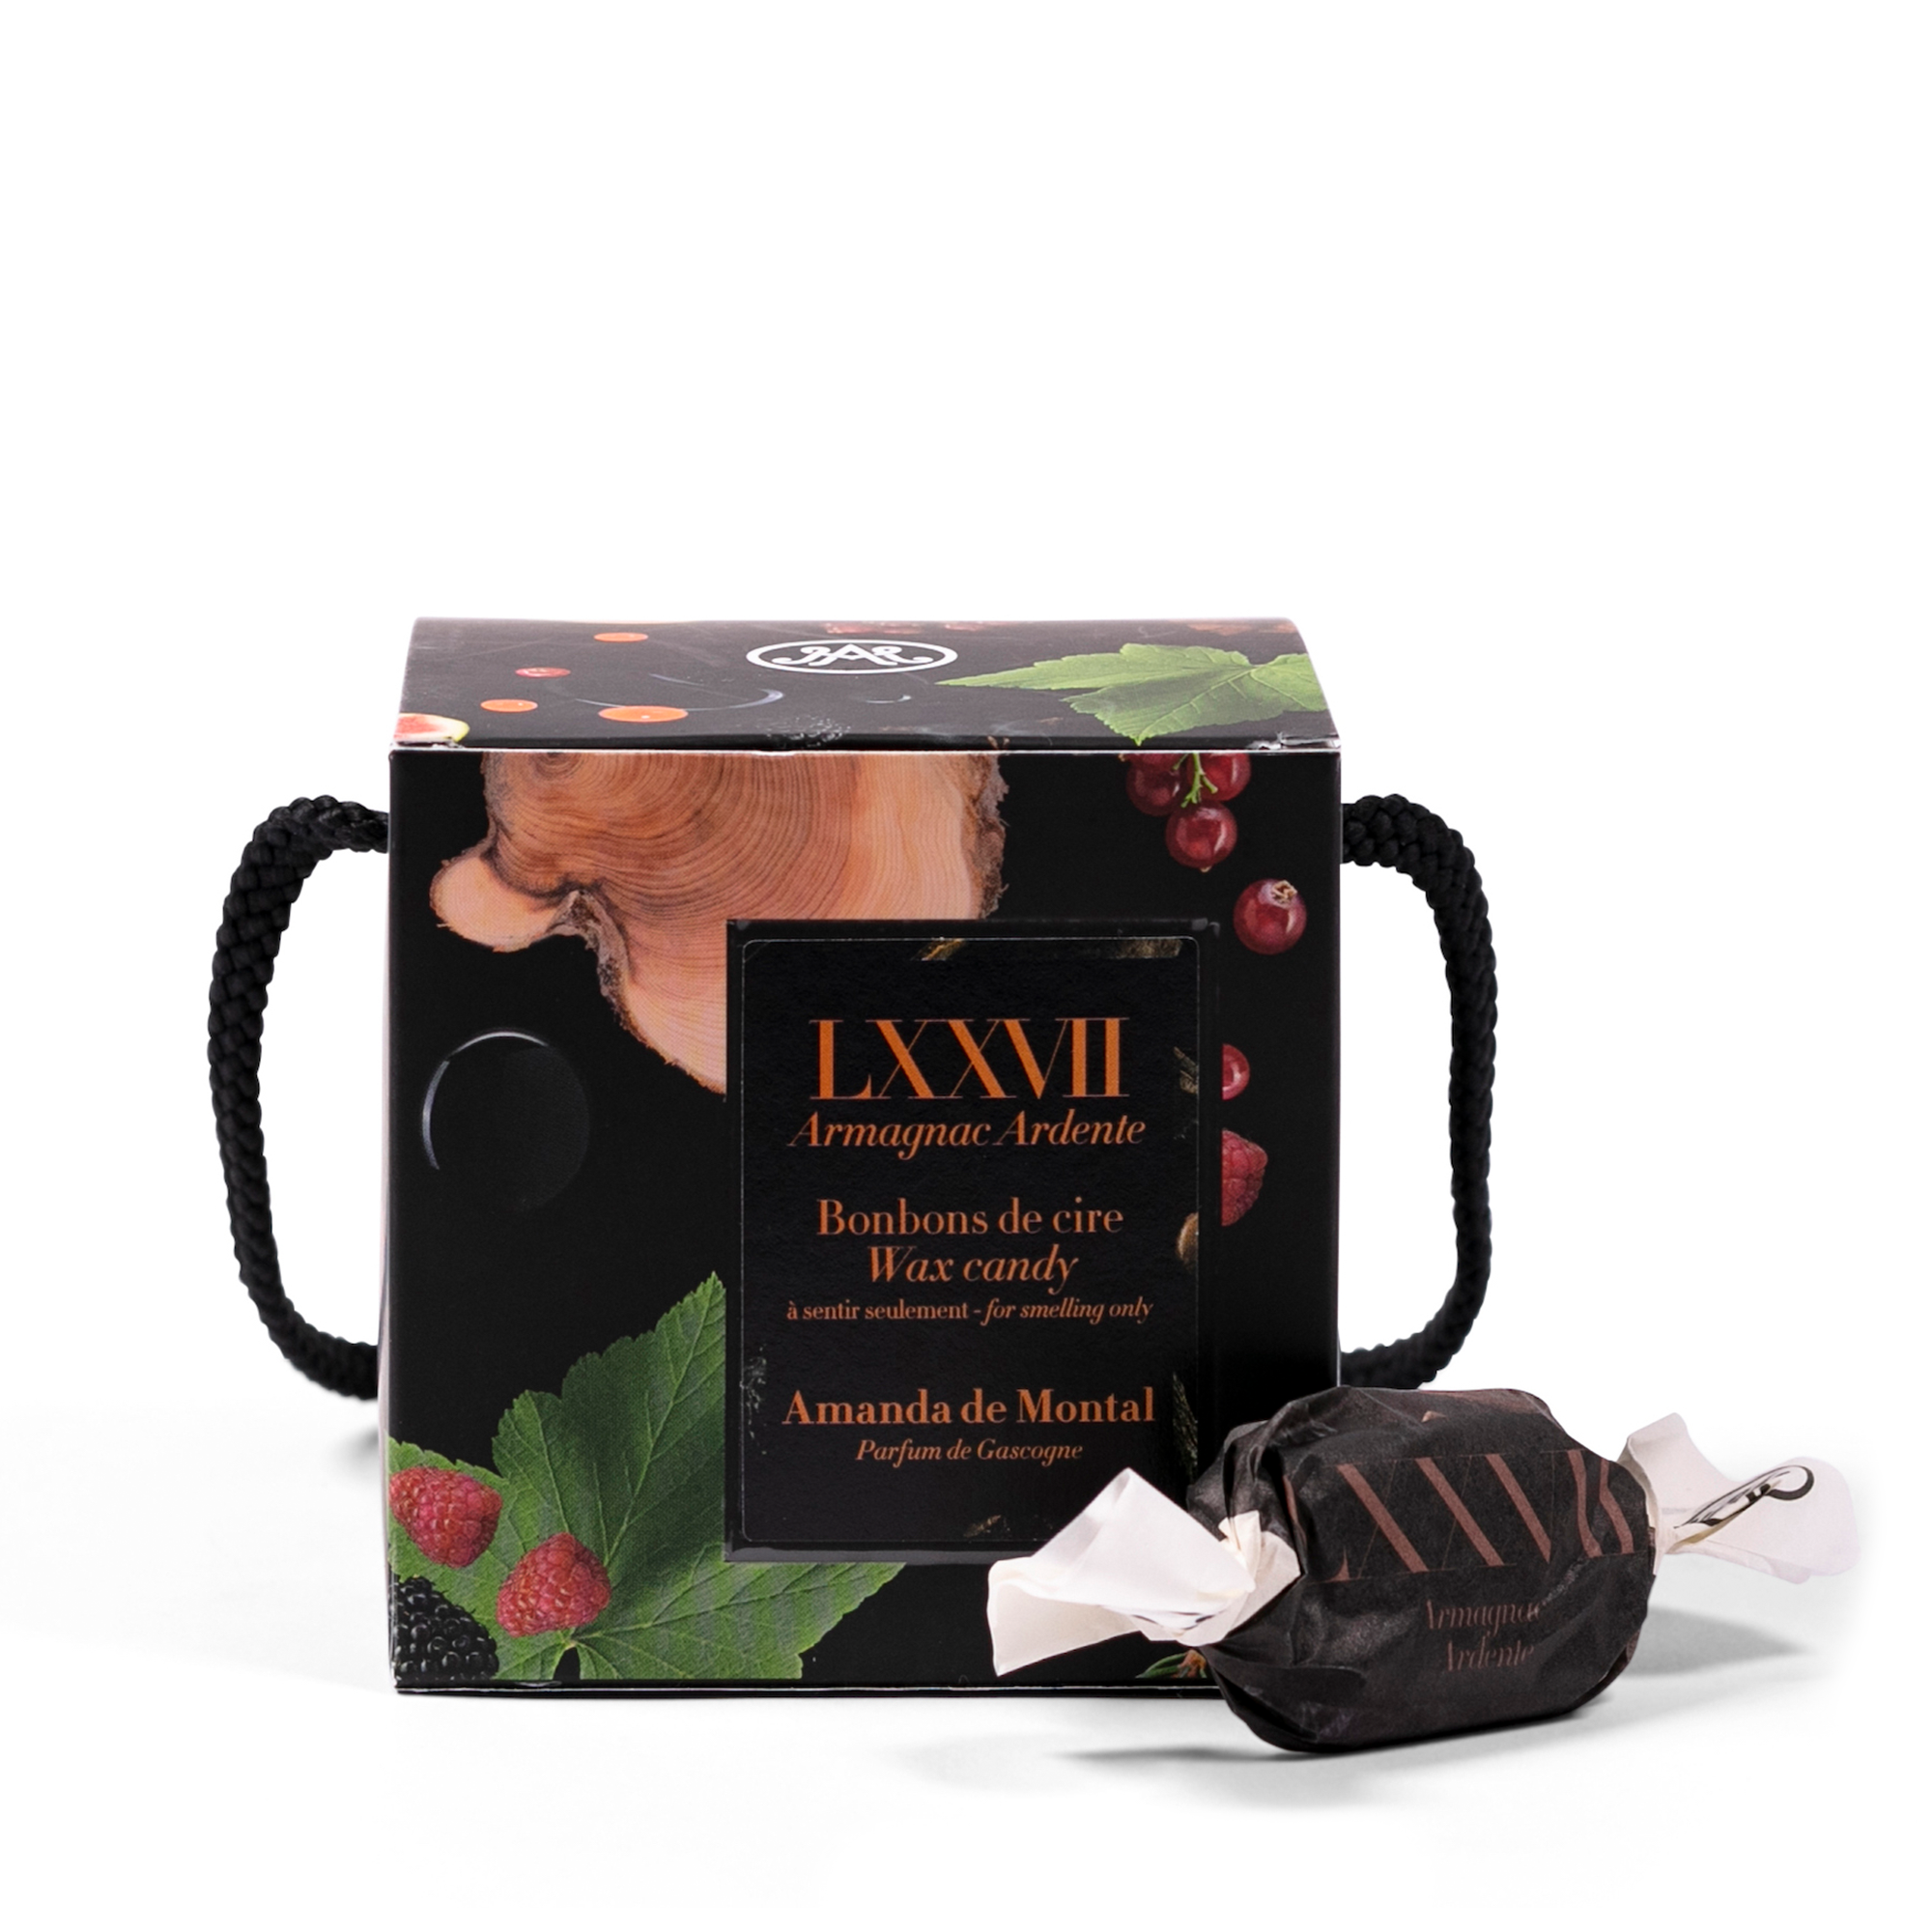 Wrapped in a black box, each scented wax candy features a precise blend of natural, plant-based waxes that capture the fragrance of prunes, apricots, oak, and a dash of Armagnac.